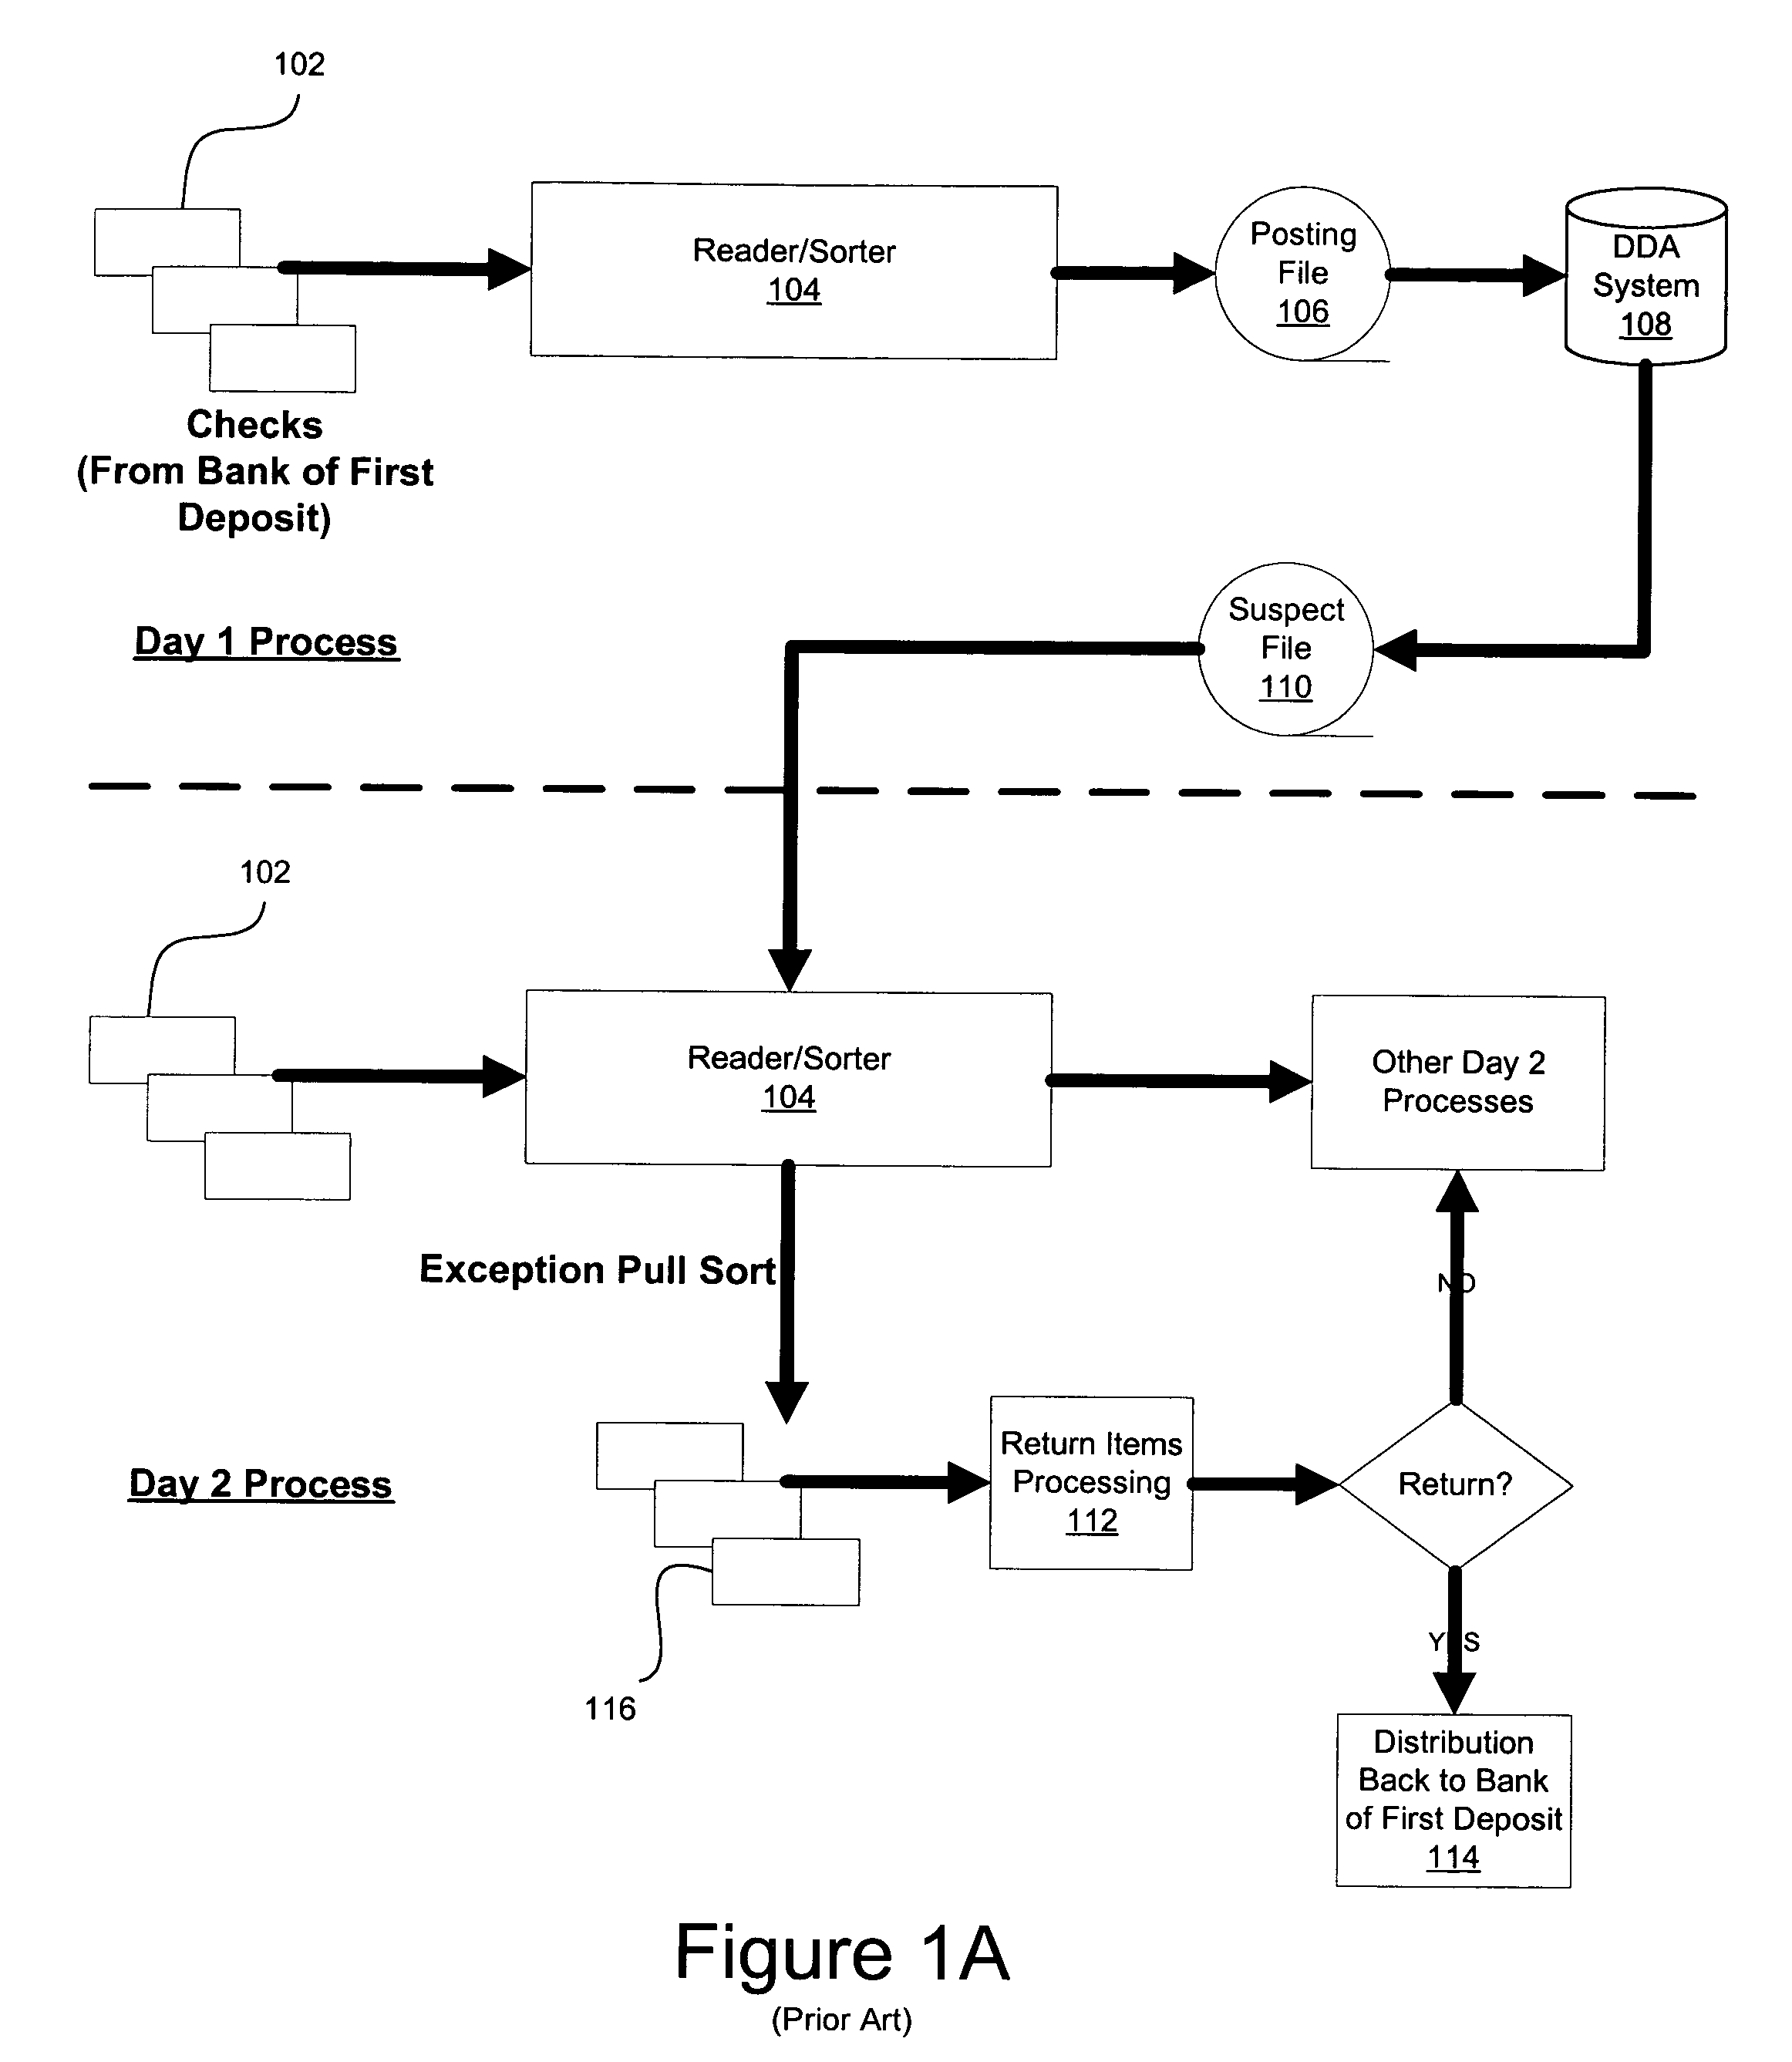 Process and method for identifying and processing returned checks